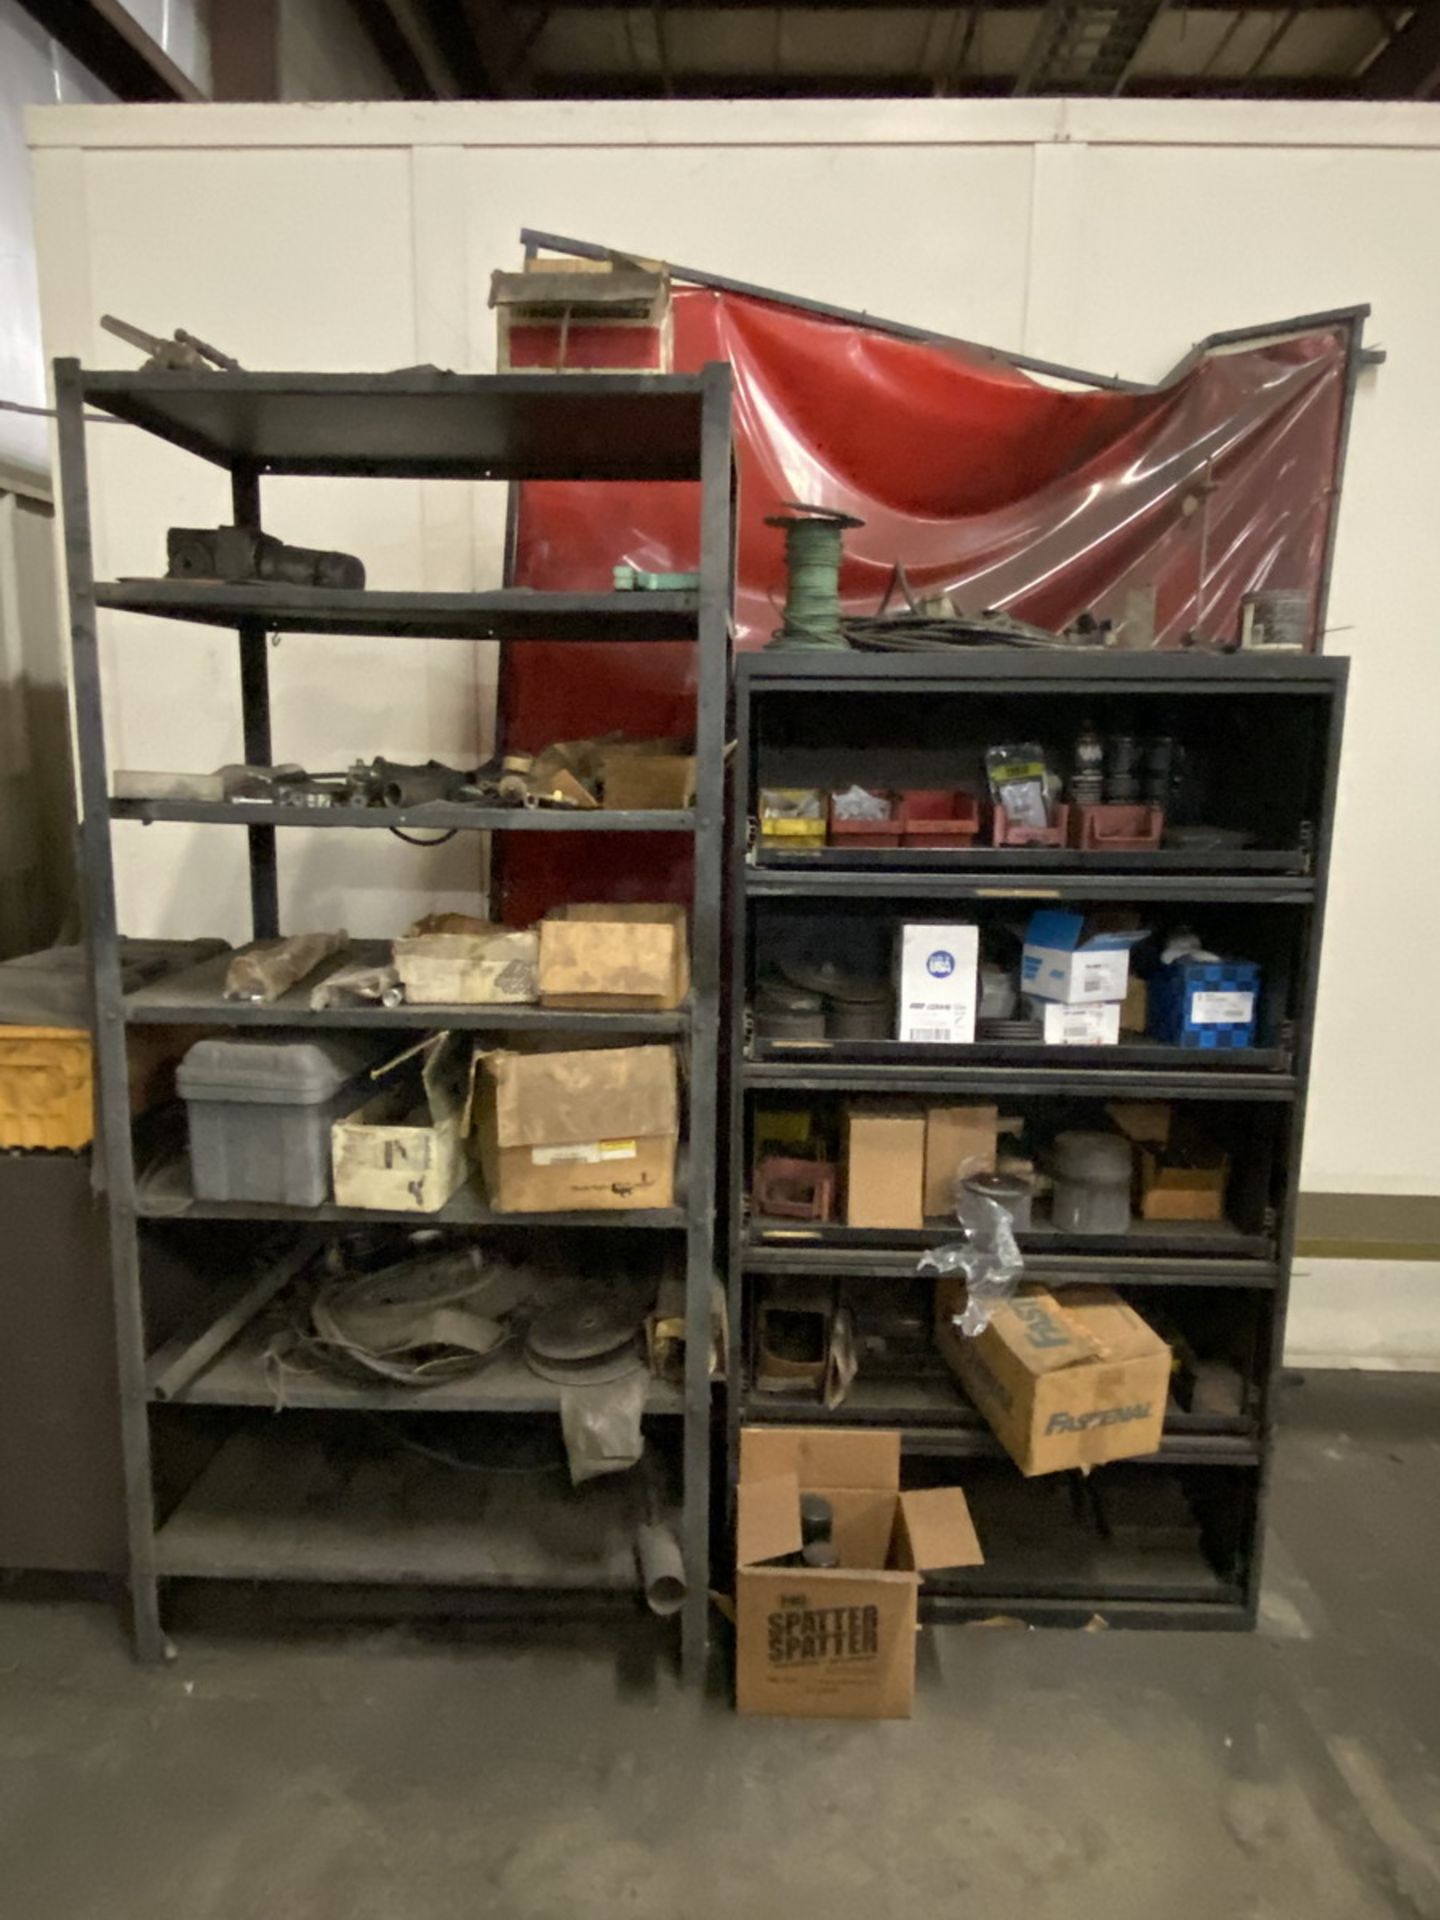 Various Sized Cabinets and Shelving Units w/ contents of Grinding Wheels, Brushes, Hoses, Etc. - Image 4 of 6